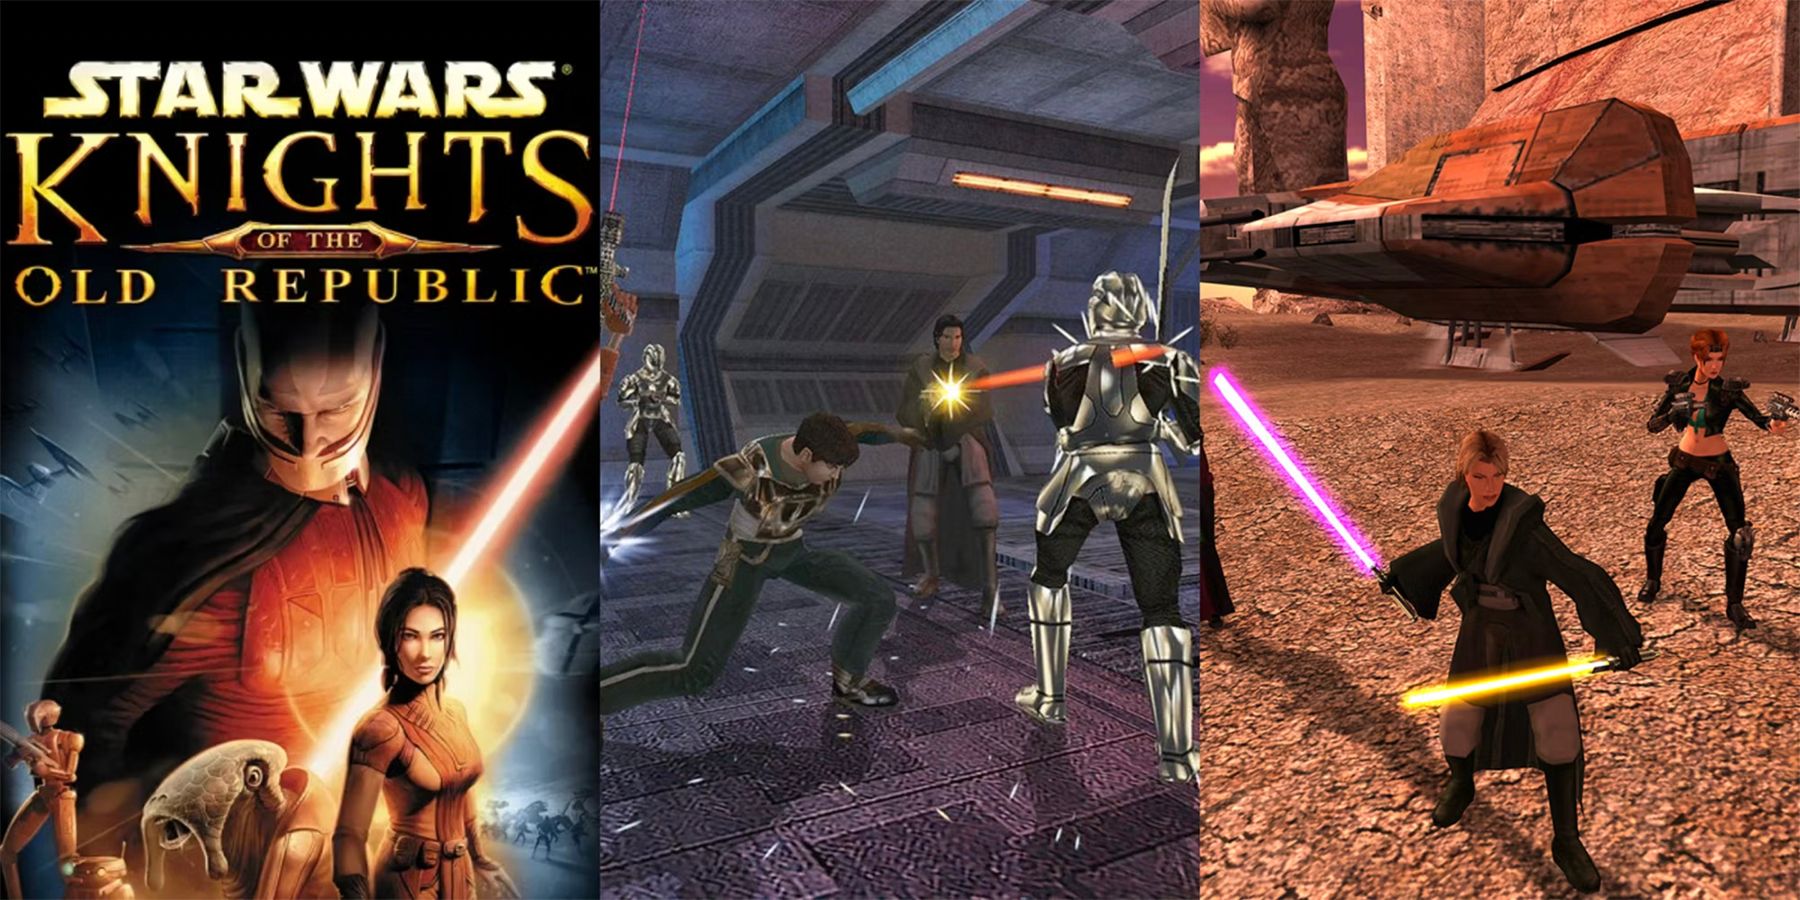 Star wars knights of the old republic русификатор для steam фото 55